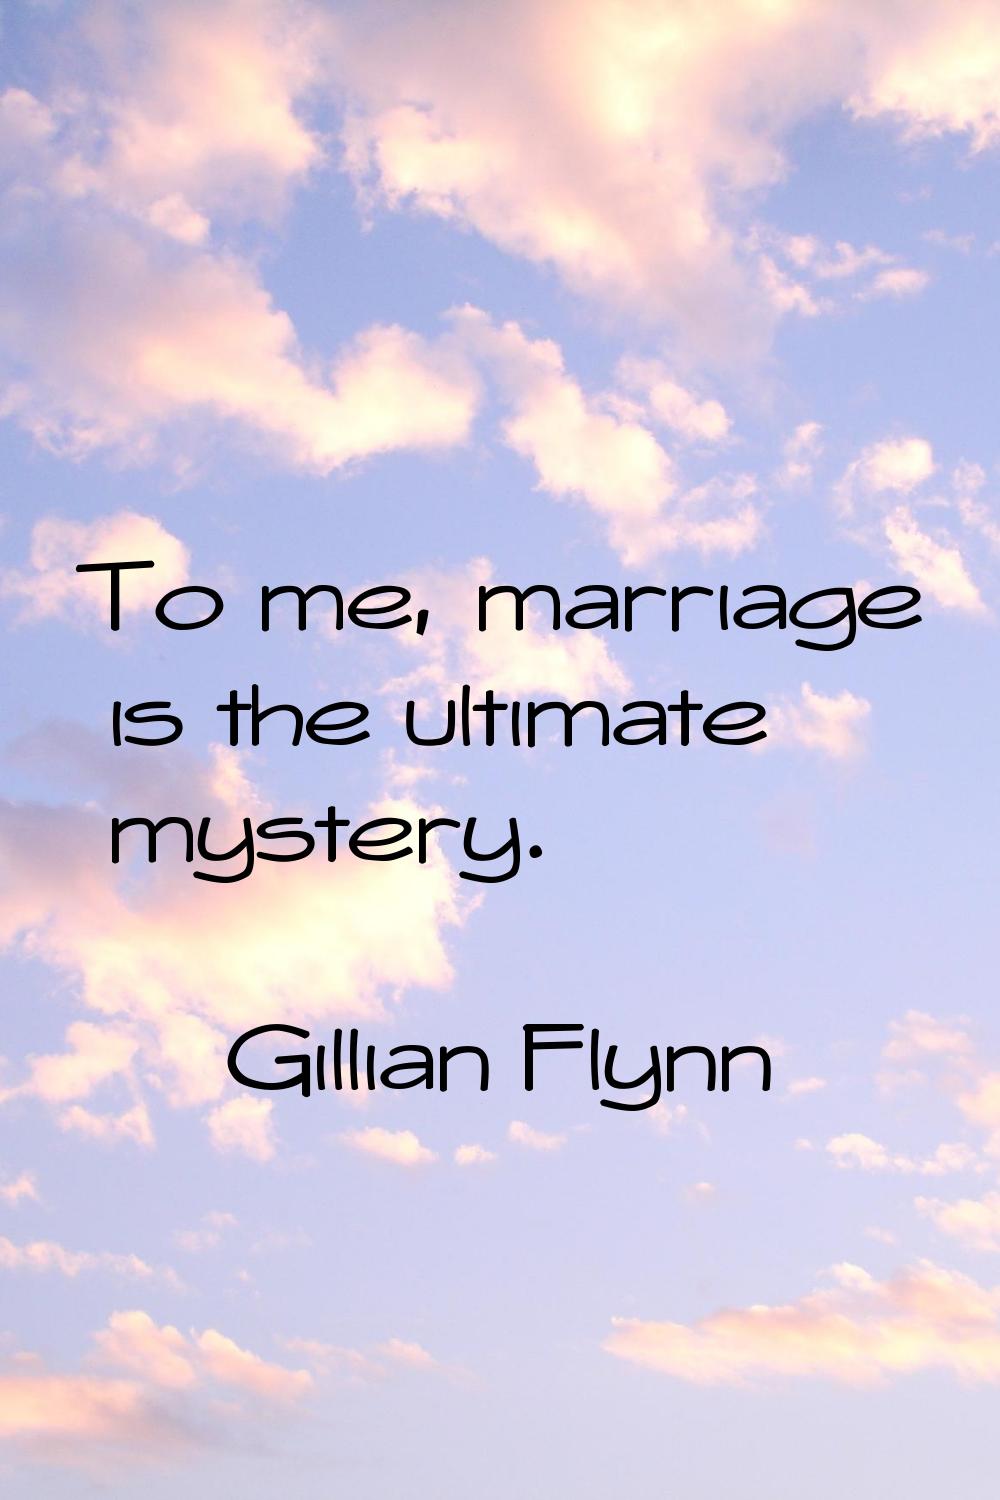 To me, marriage is the ultimate mystery.